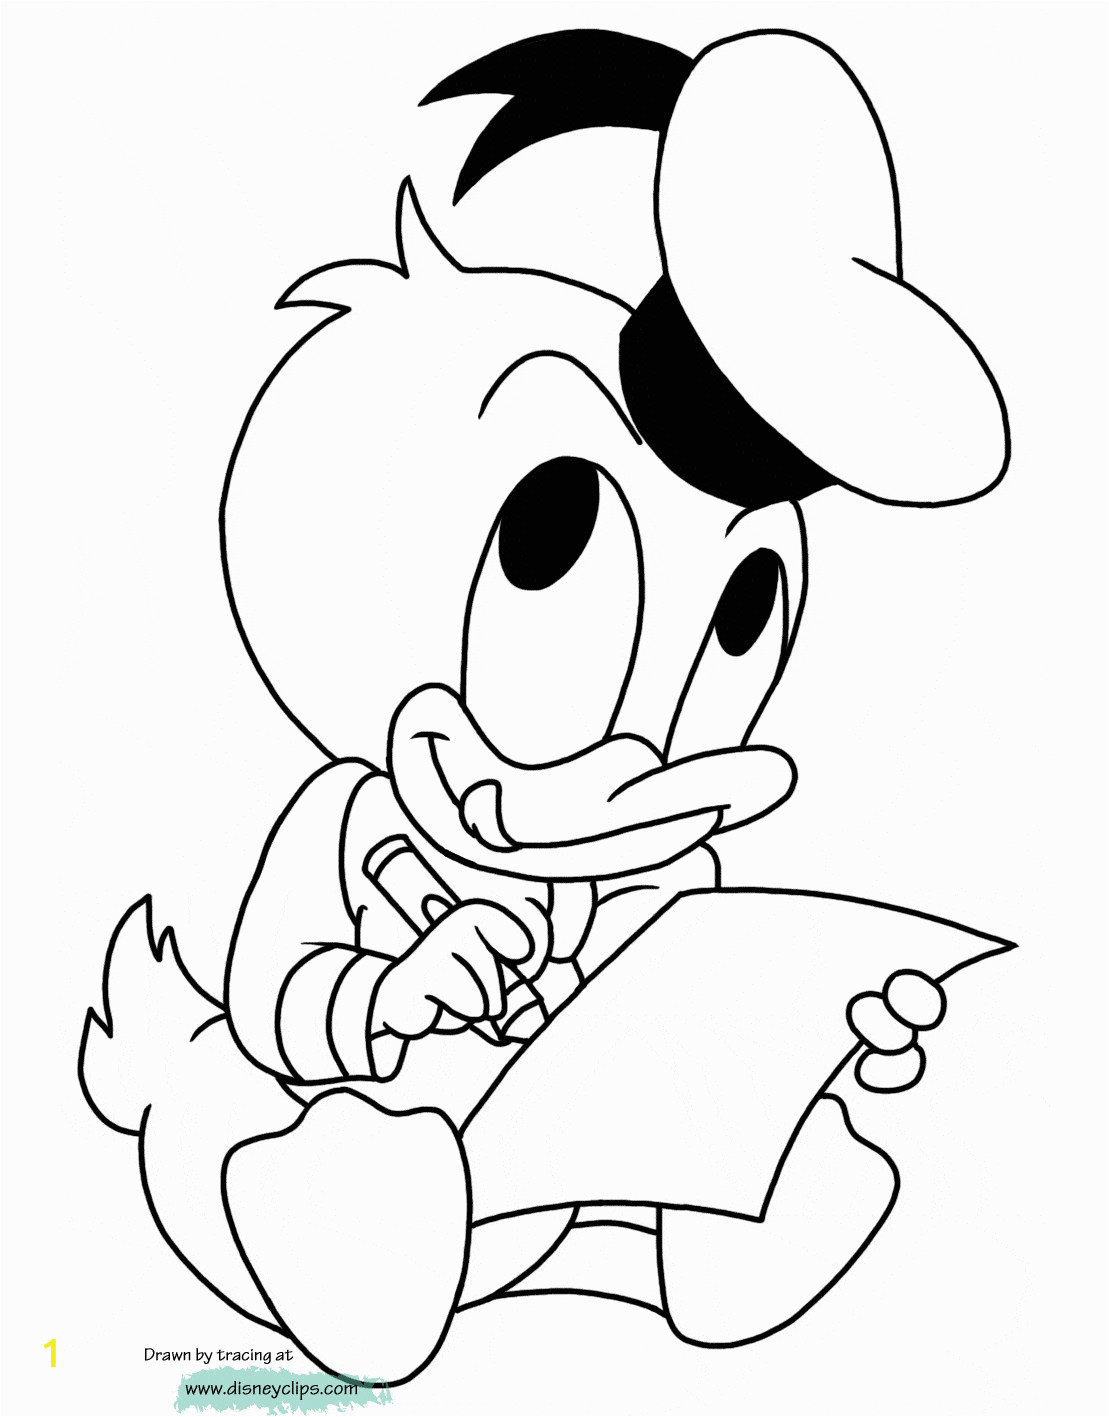 Free Coloring Pages Of Baby Disney Characters Best Free Baby Disney Character Coloring Pages Image